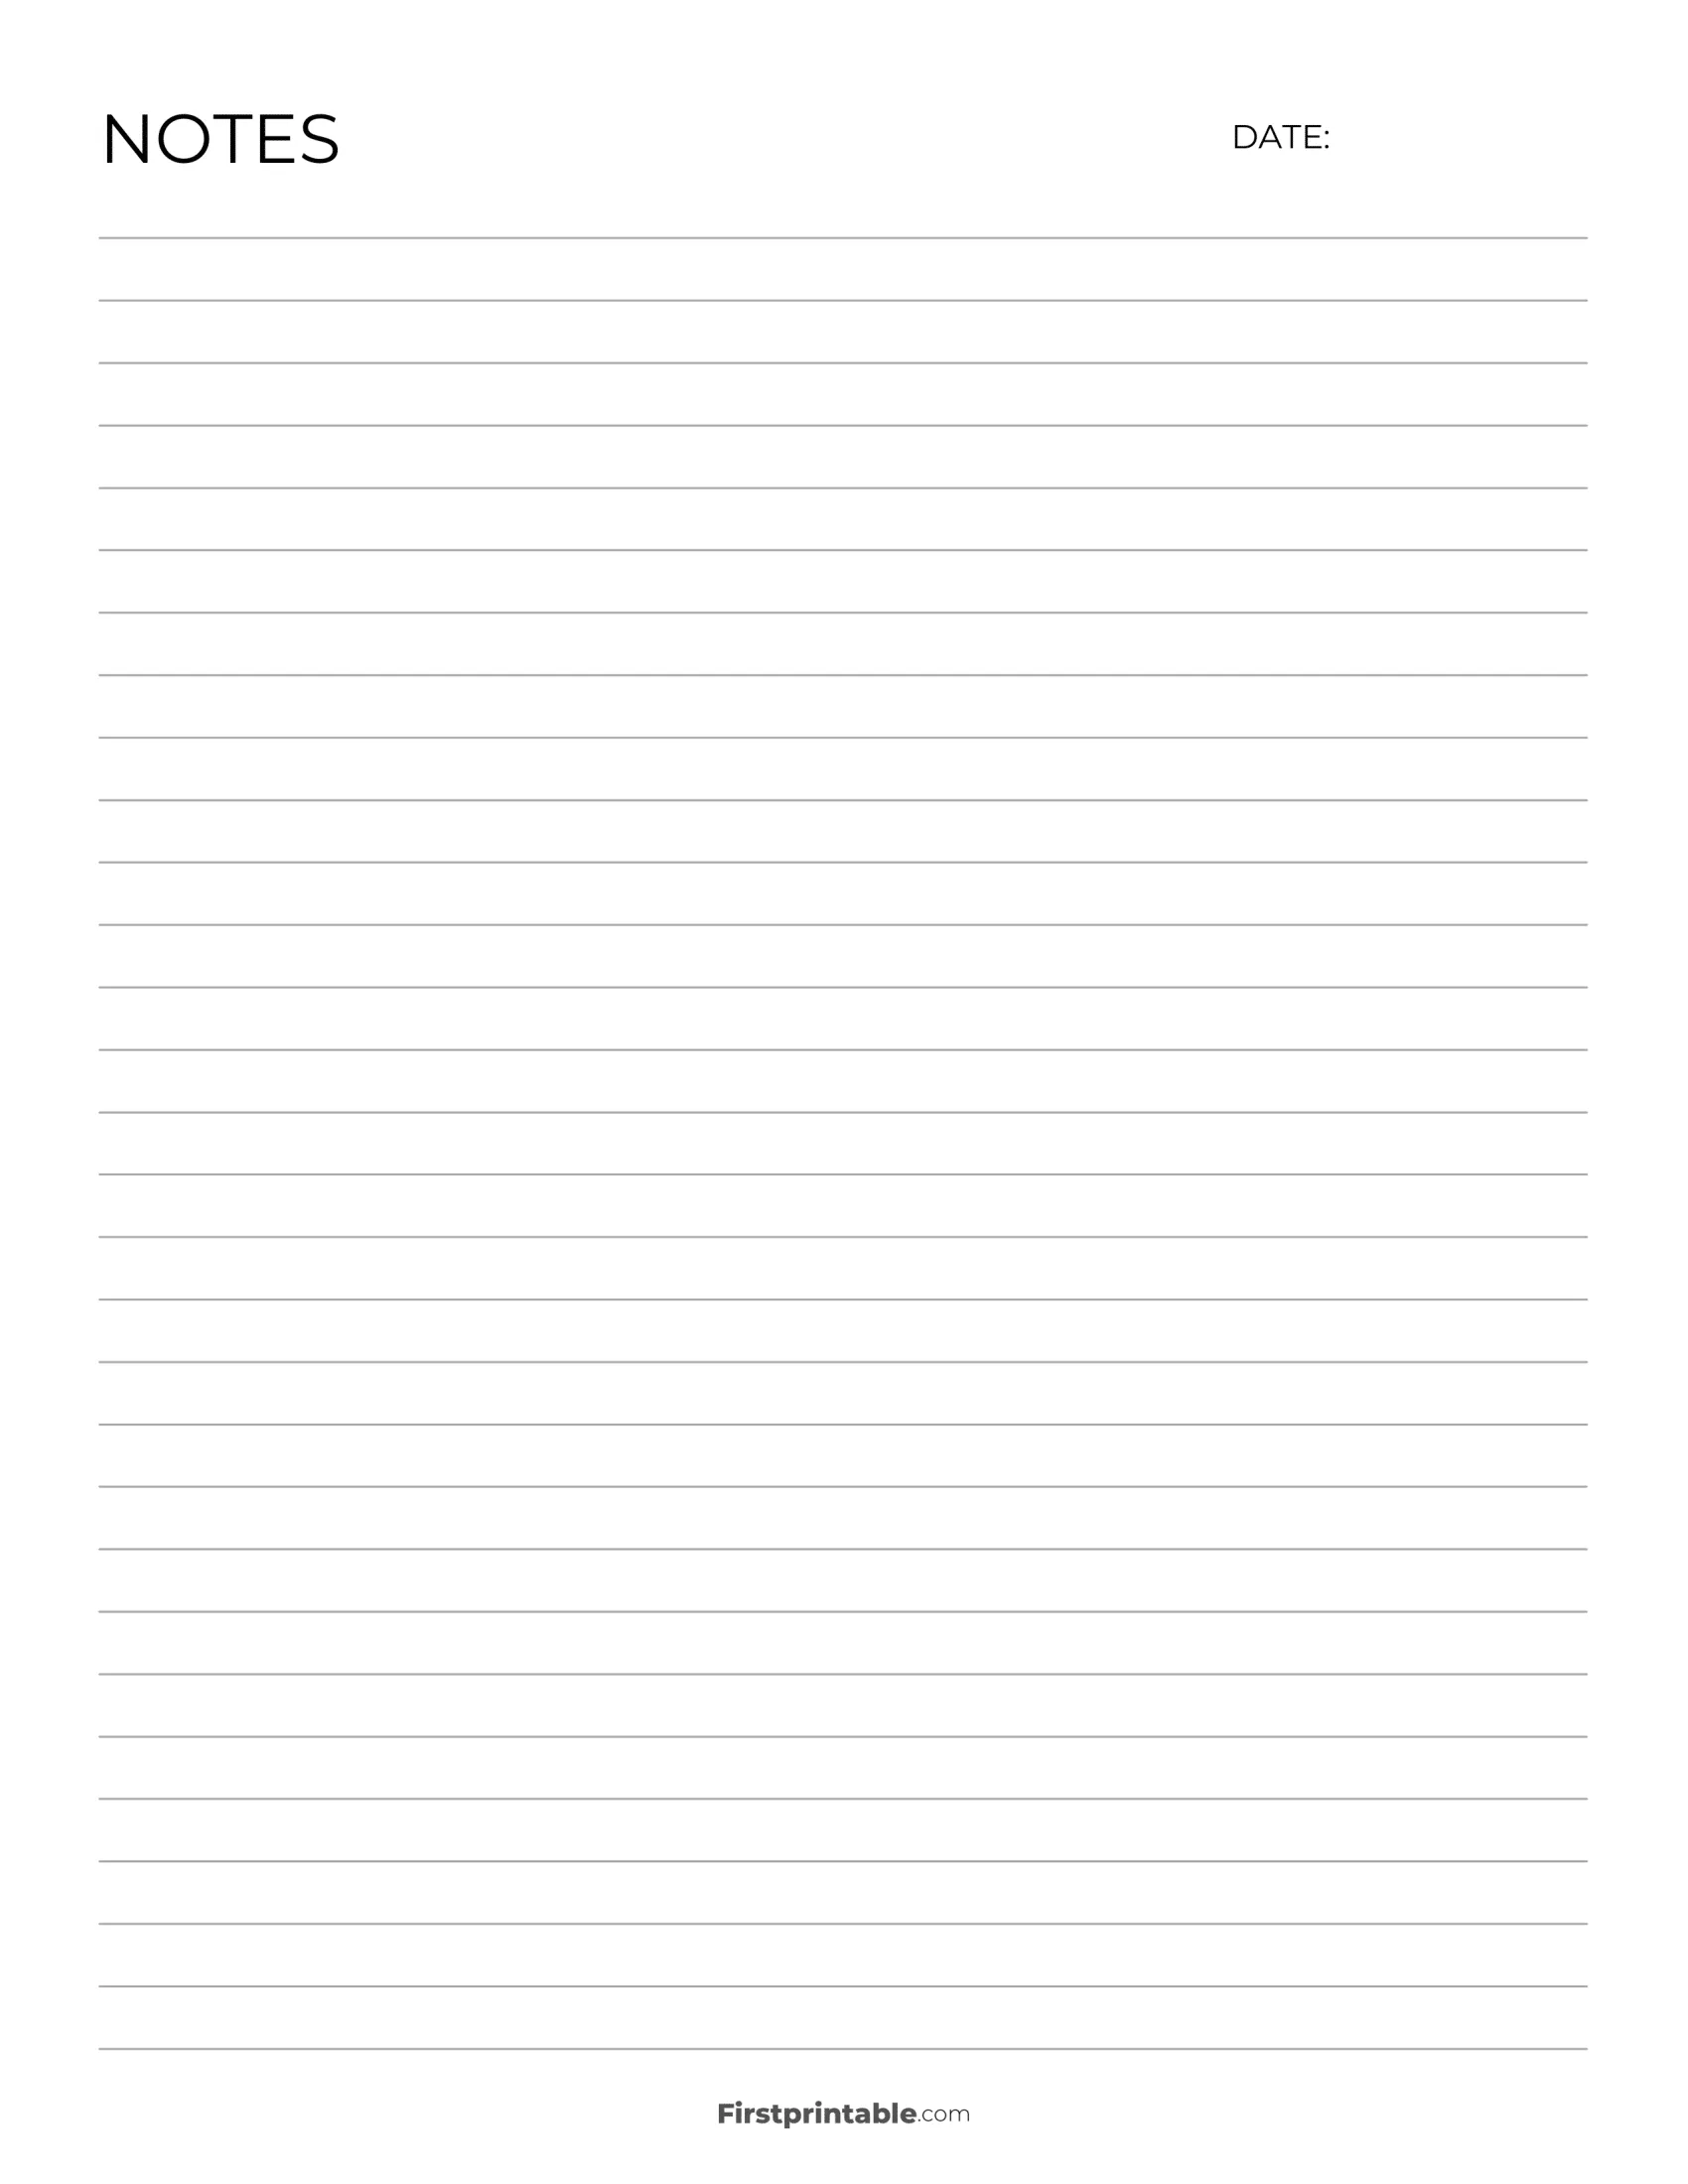 Printable lined Paper - Notes Taking